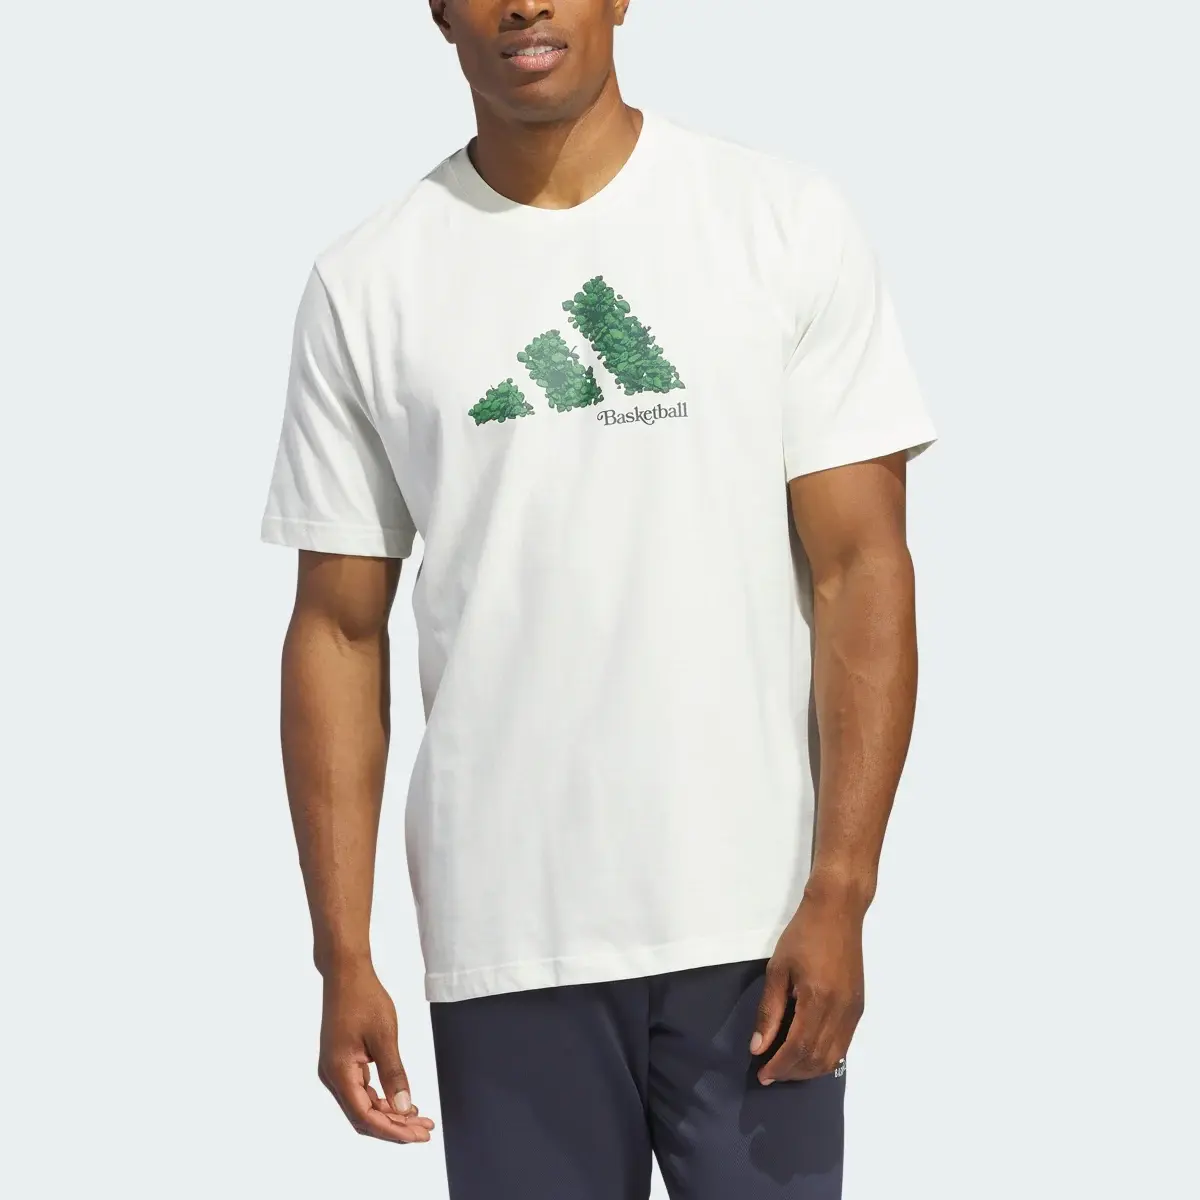 Adidas T-shirt graphique Court Therapy. 1